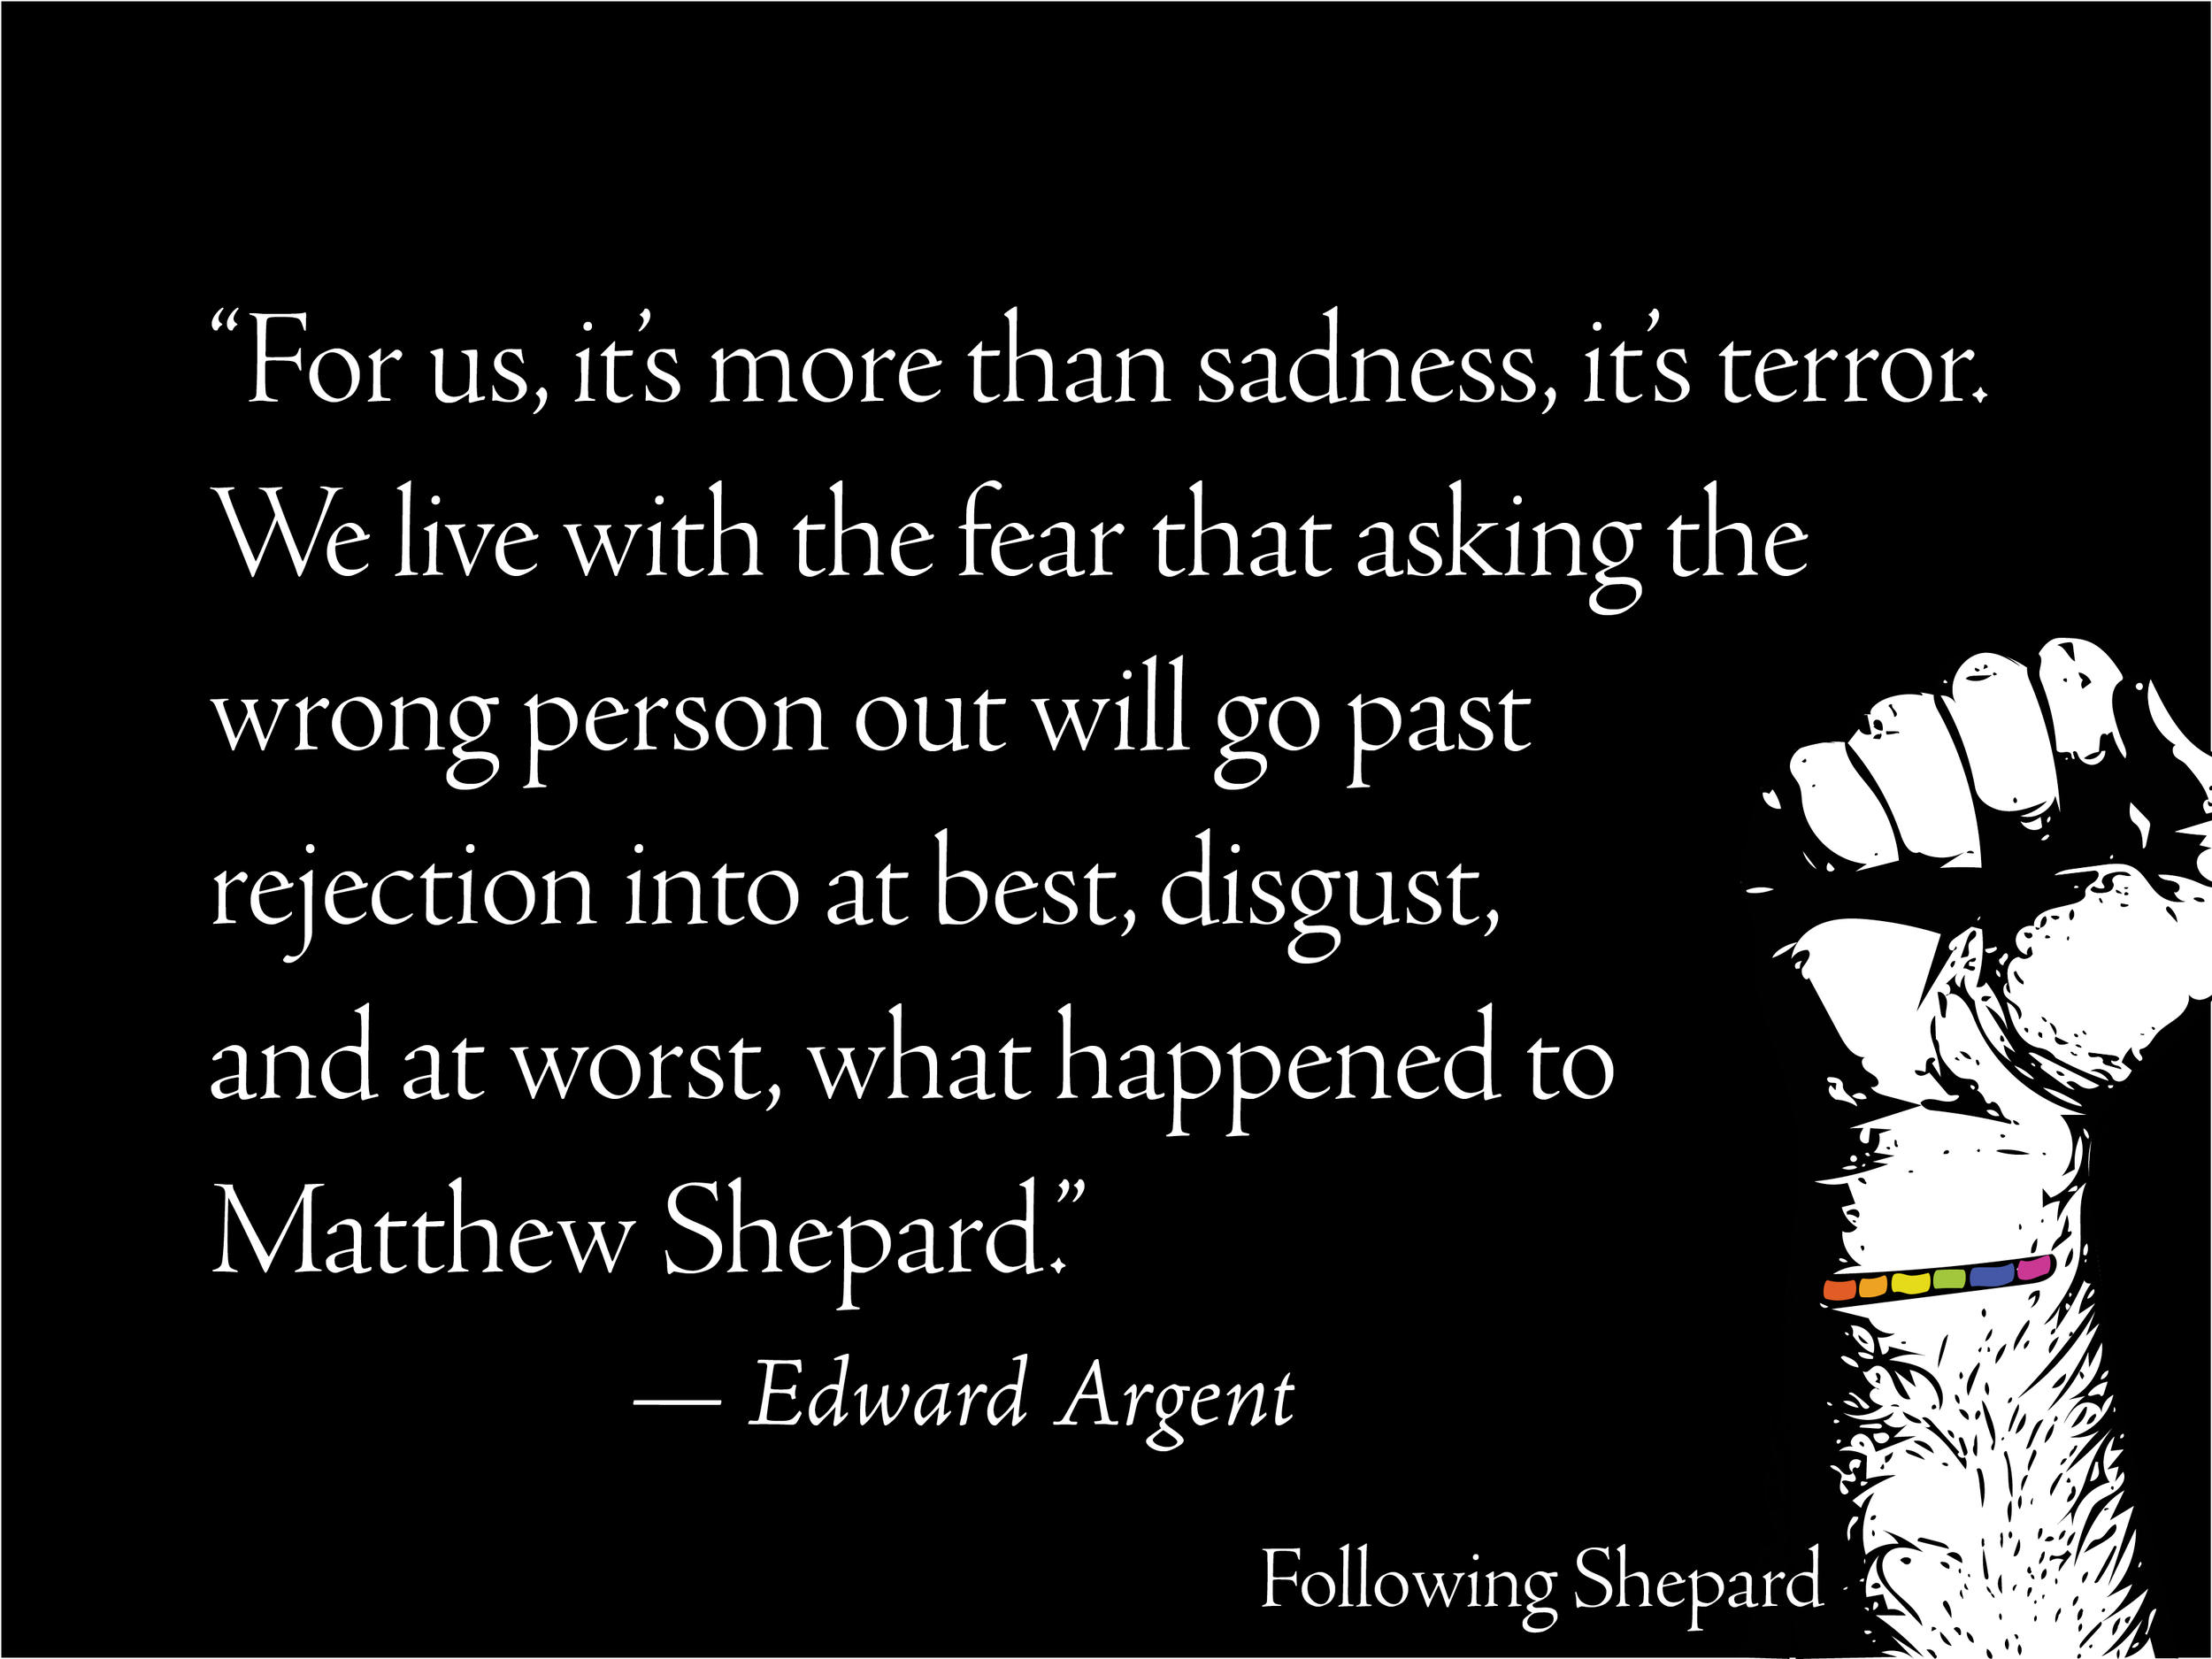 Following Shepard Quote Images10.jpg